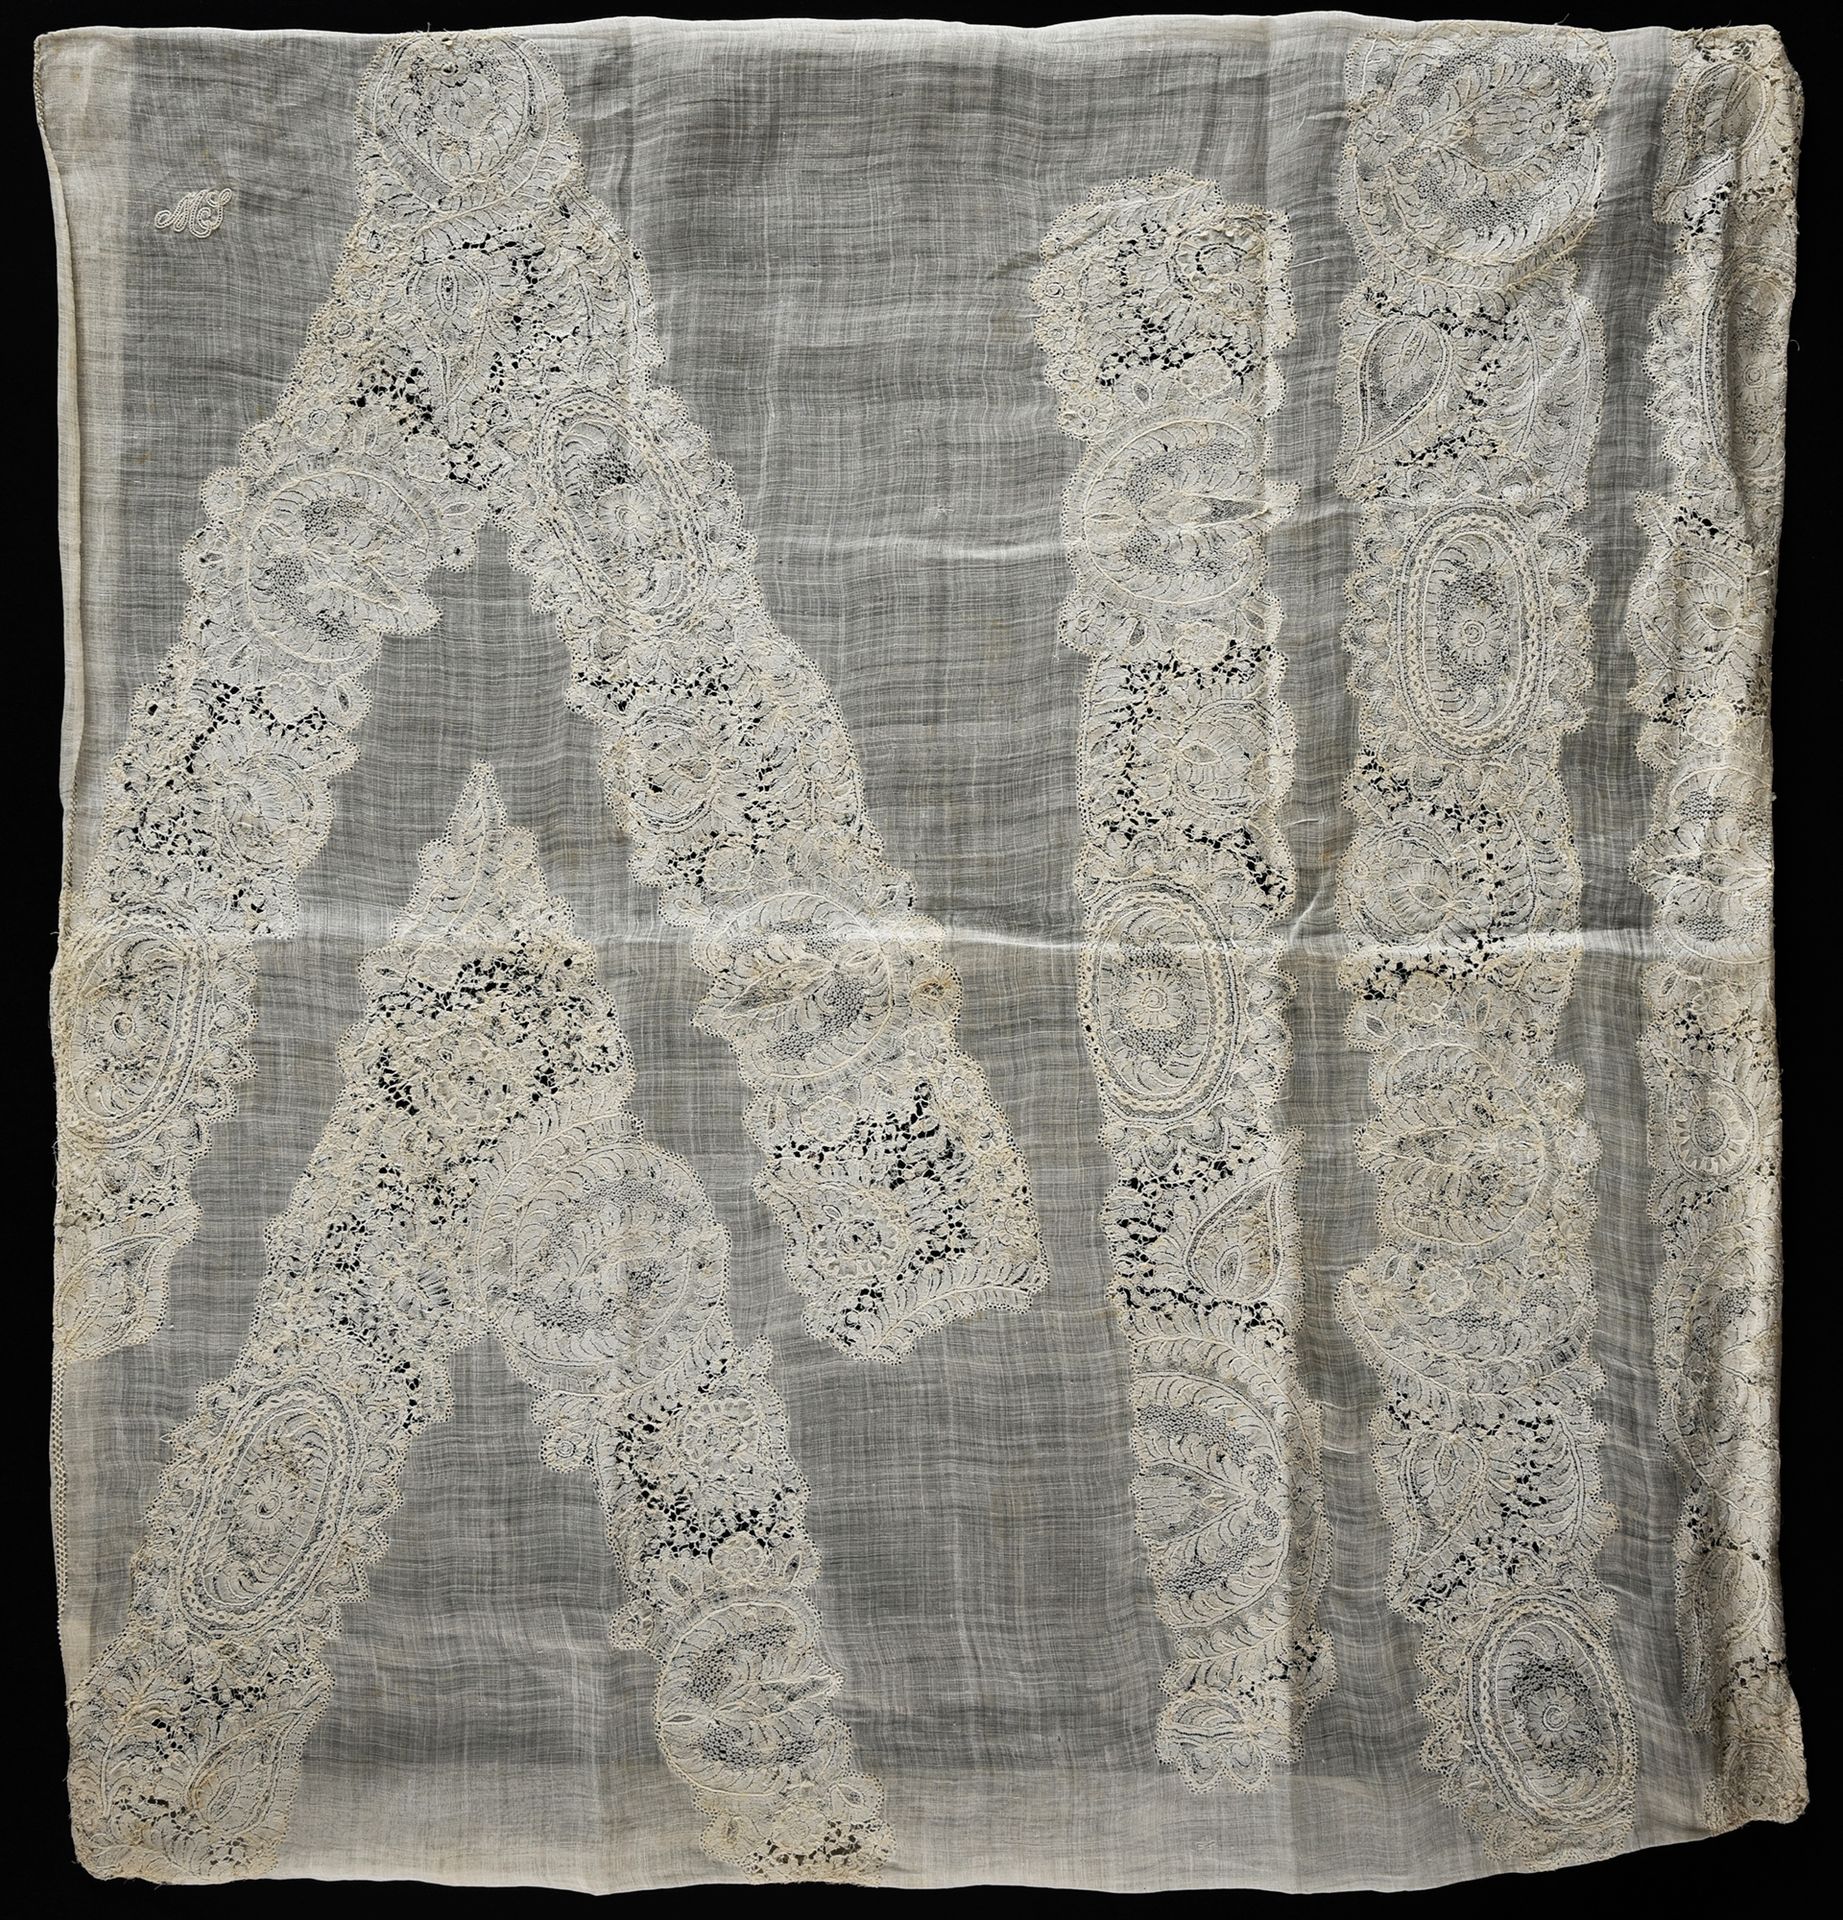 Null Pillowcase in Brussels lace, spindles, circa 1730-40.

Pillowcase made in t&hellip;